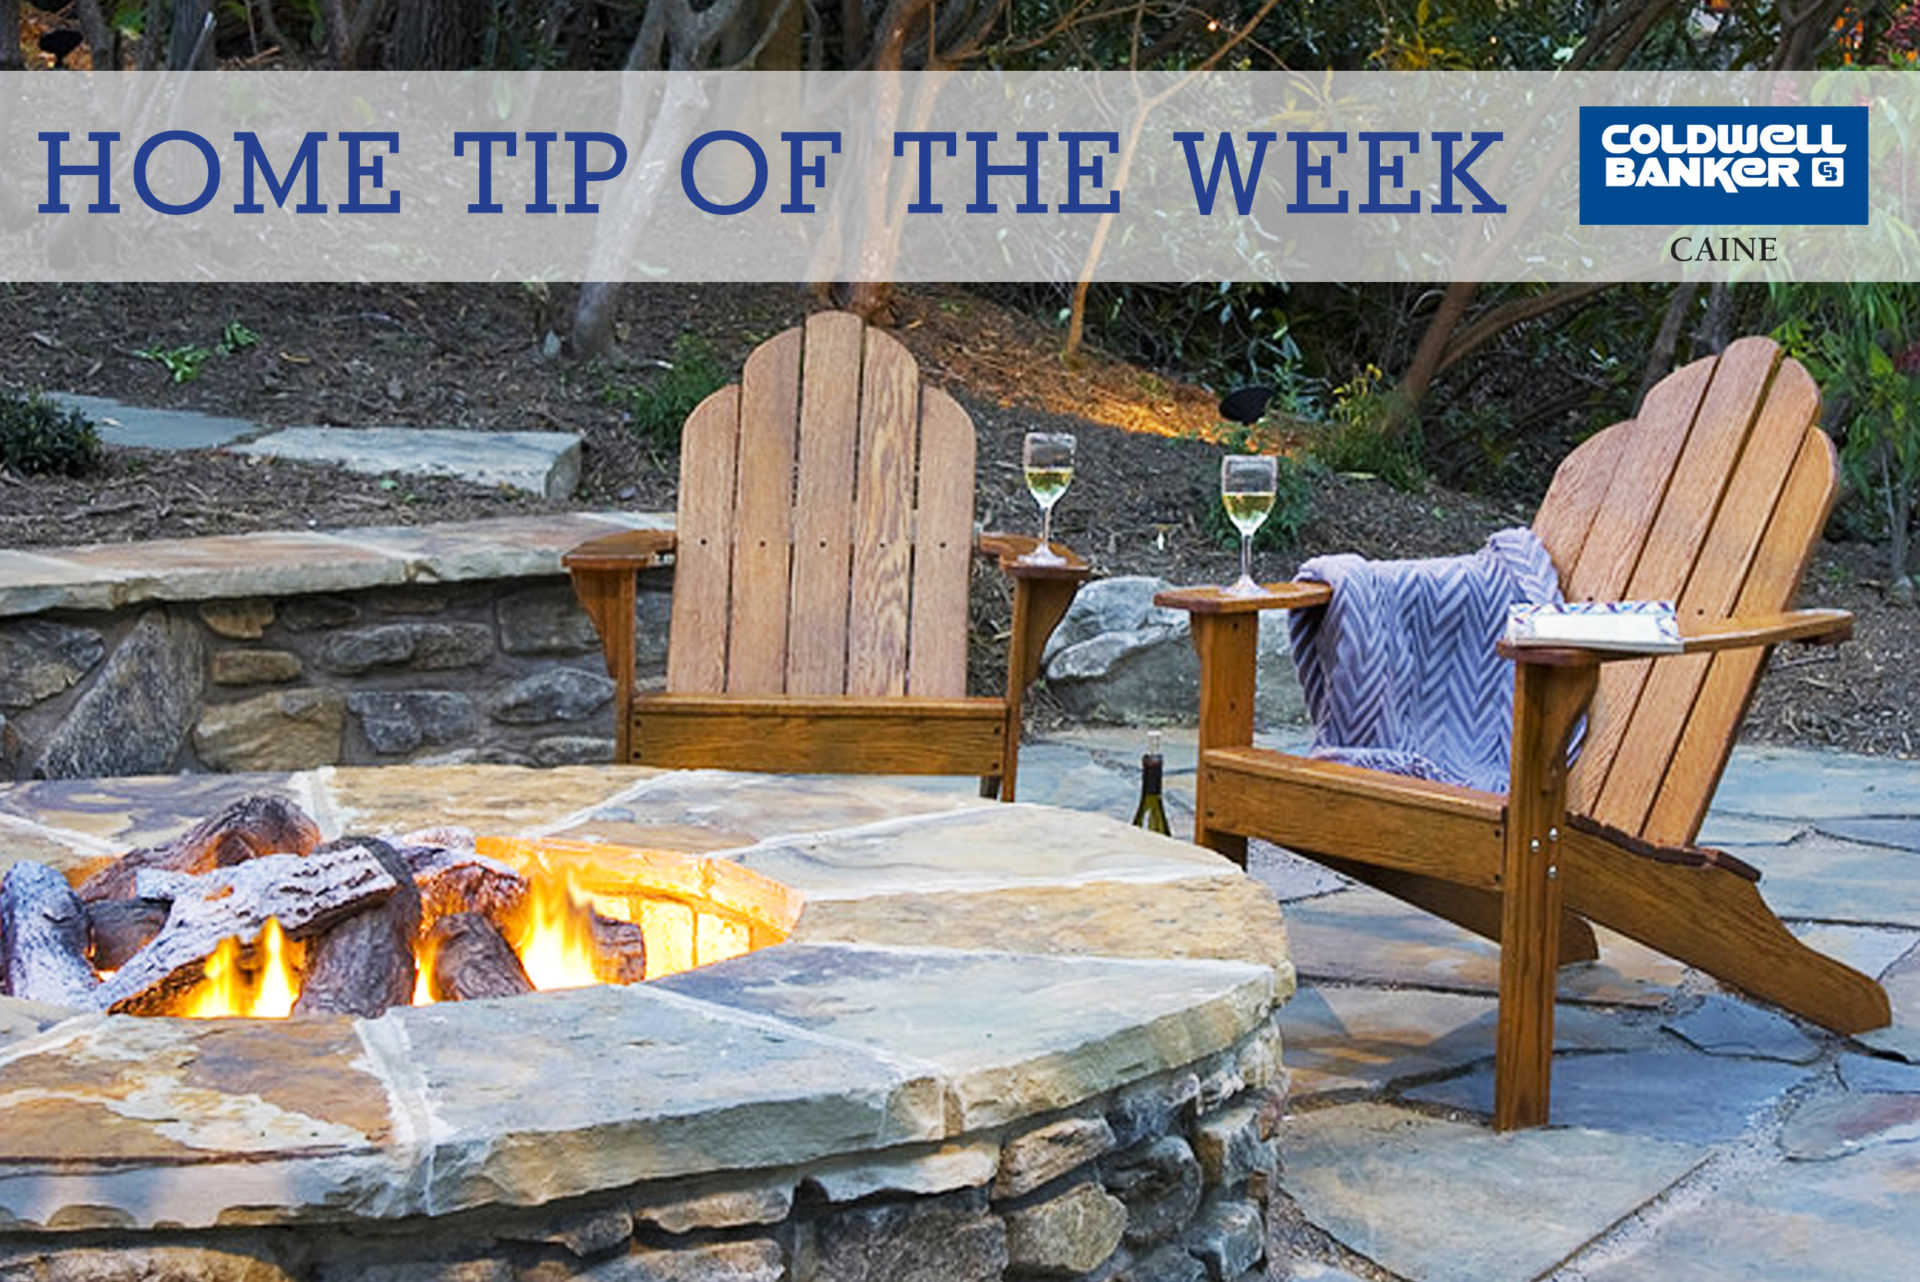 Home Tip Of The Week: Four Tips to Improve Your Backyard This Fall